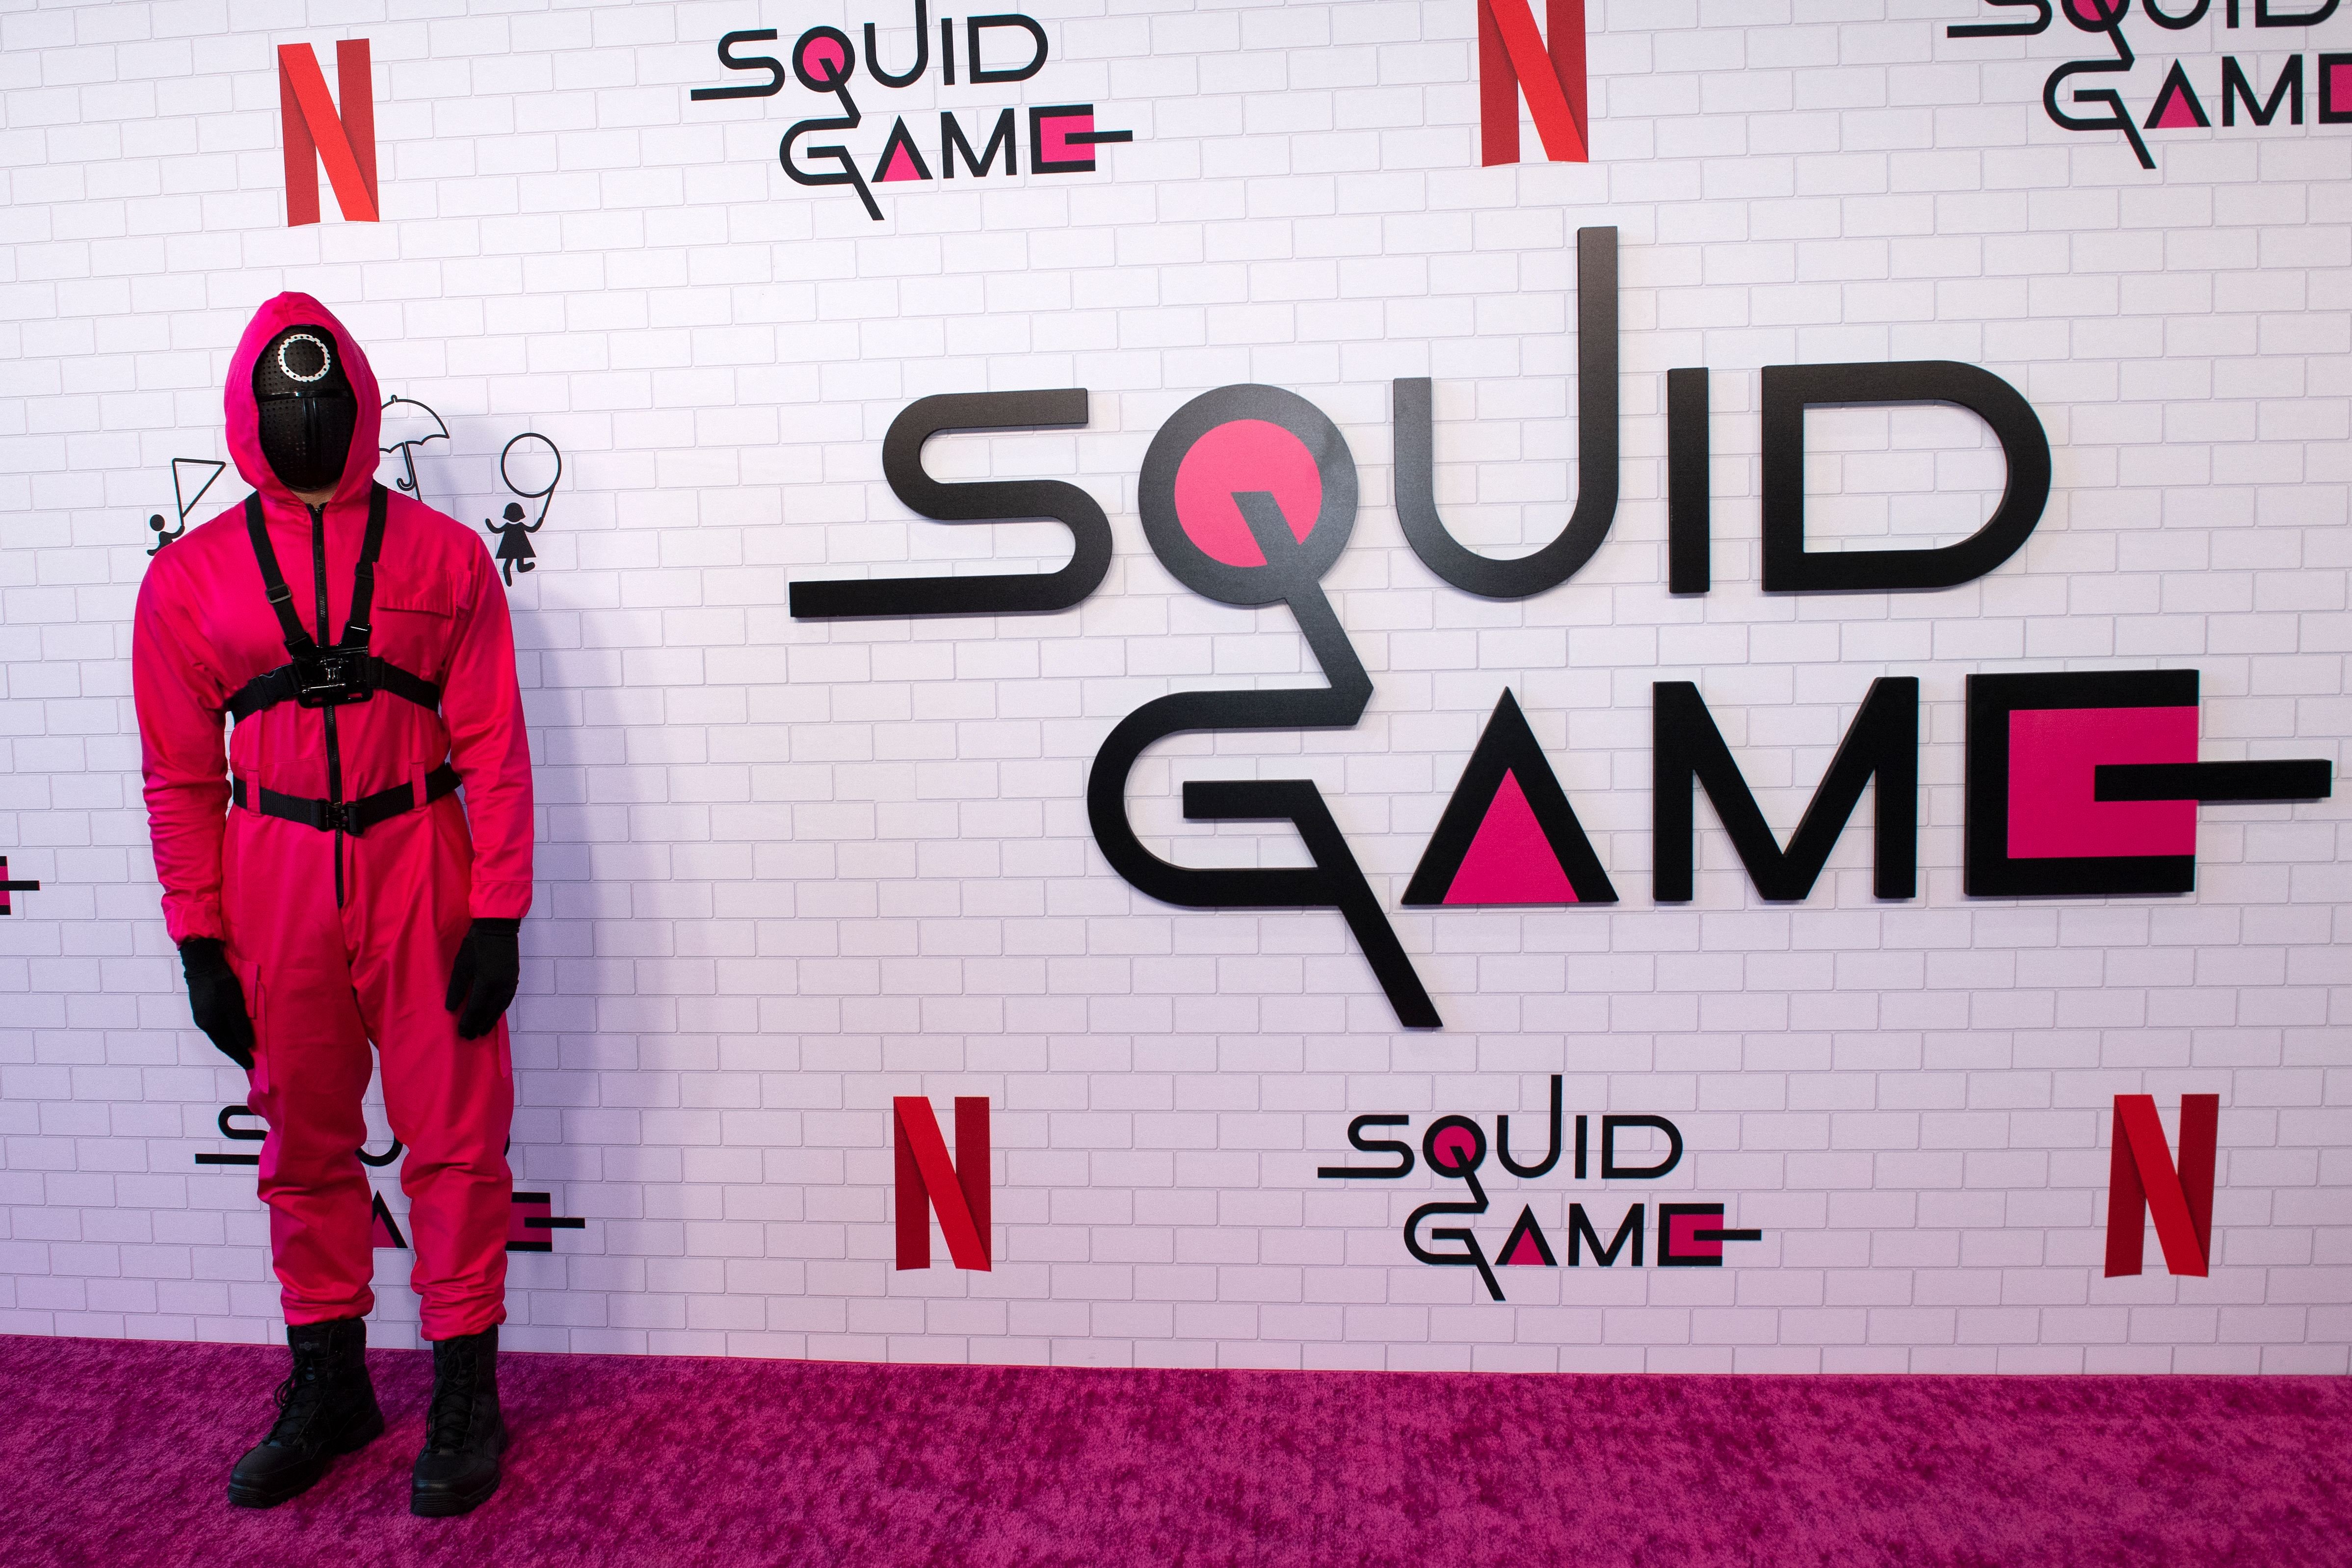 A pink guard is part of the ambiance at Netflix's "Squid Game" Special Event on June 12, 2022 in Los Angeles. | Source: Getty Images